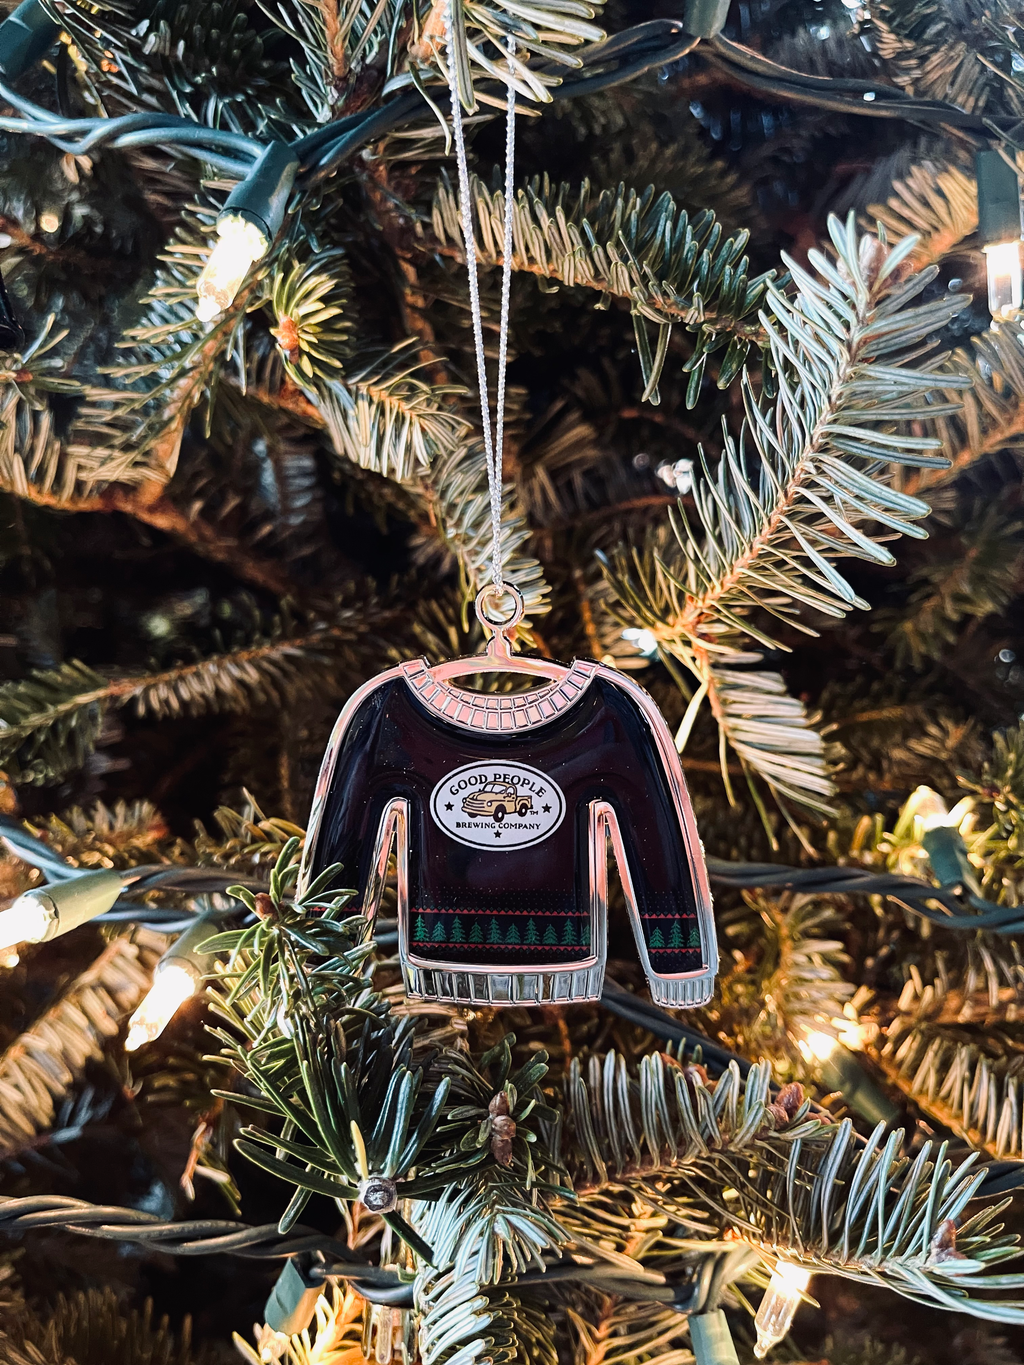 Good People Brewing Tacky Sweater Ornament